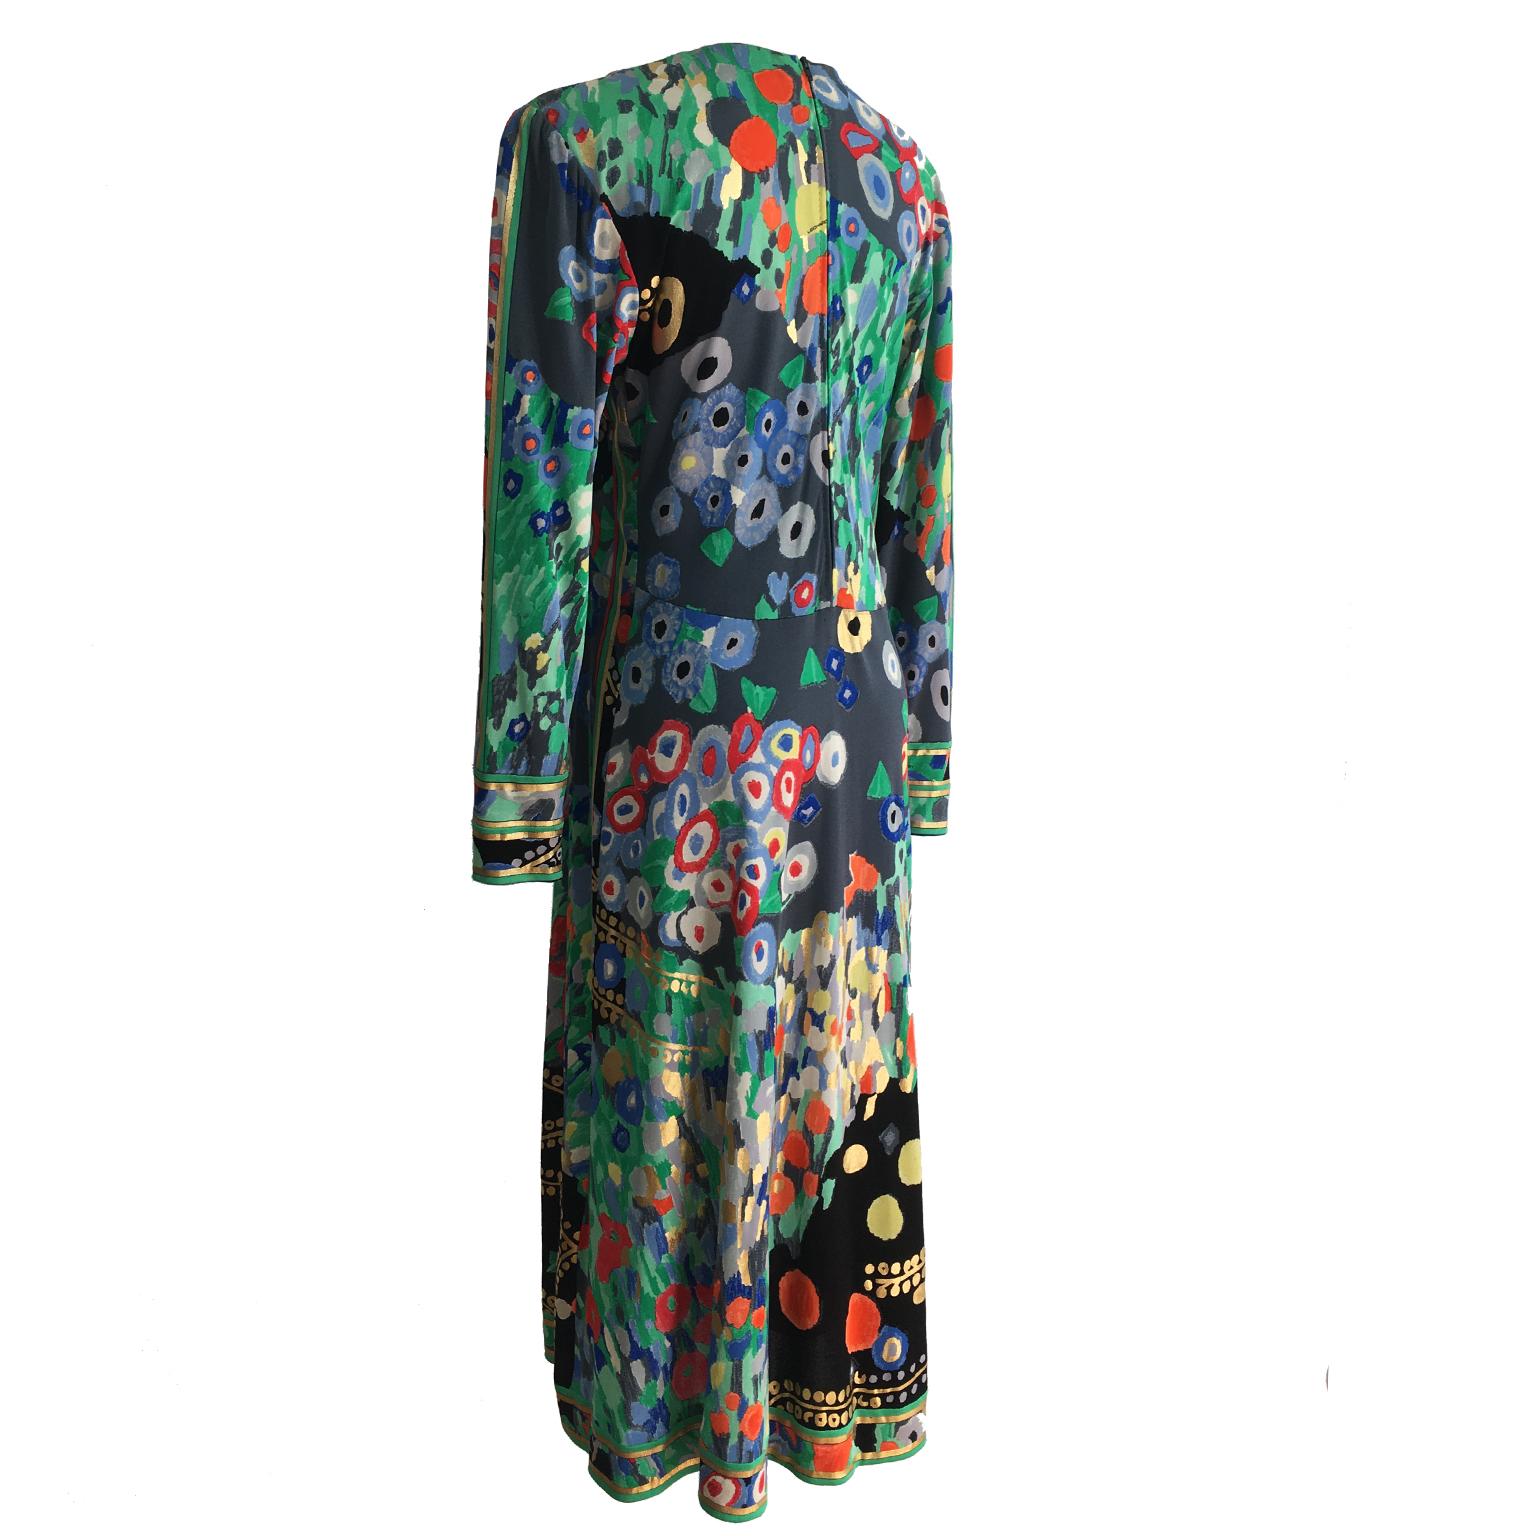 A great vintage dress by Leonard Paris. The silk jersey dress is in a great mix of colours printed with a orange, grey, bright red and golden high light like multi-coloured Klimt painting like pattern. Small Leonard signatures are also printed onto